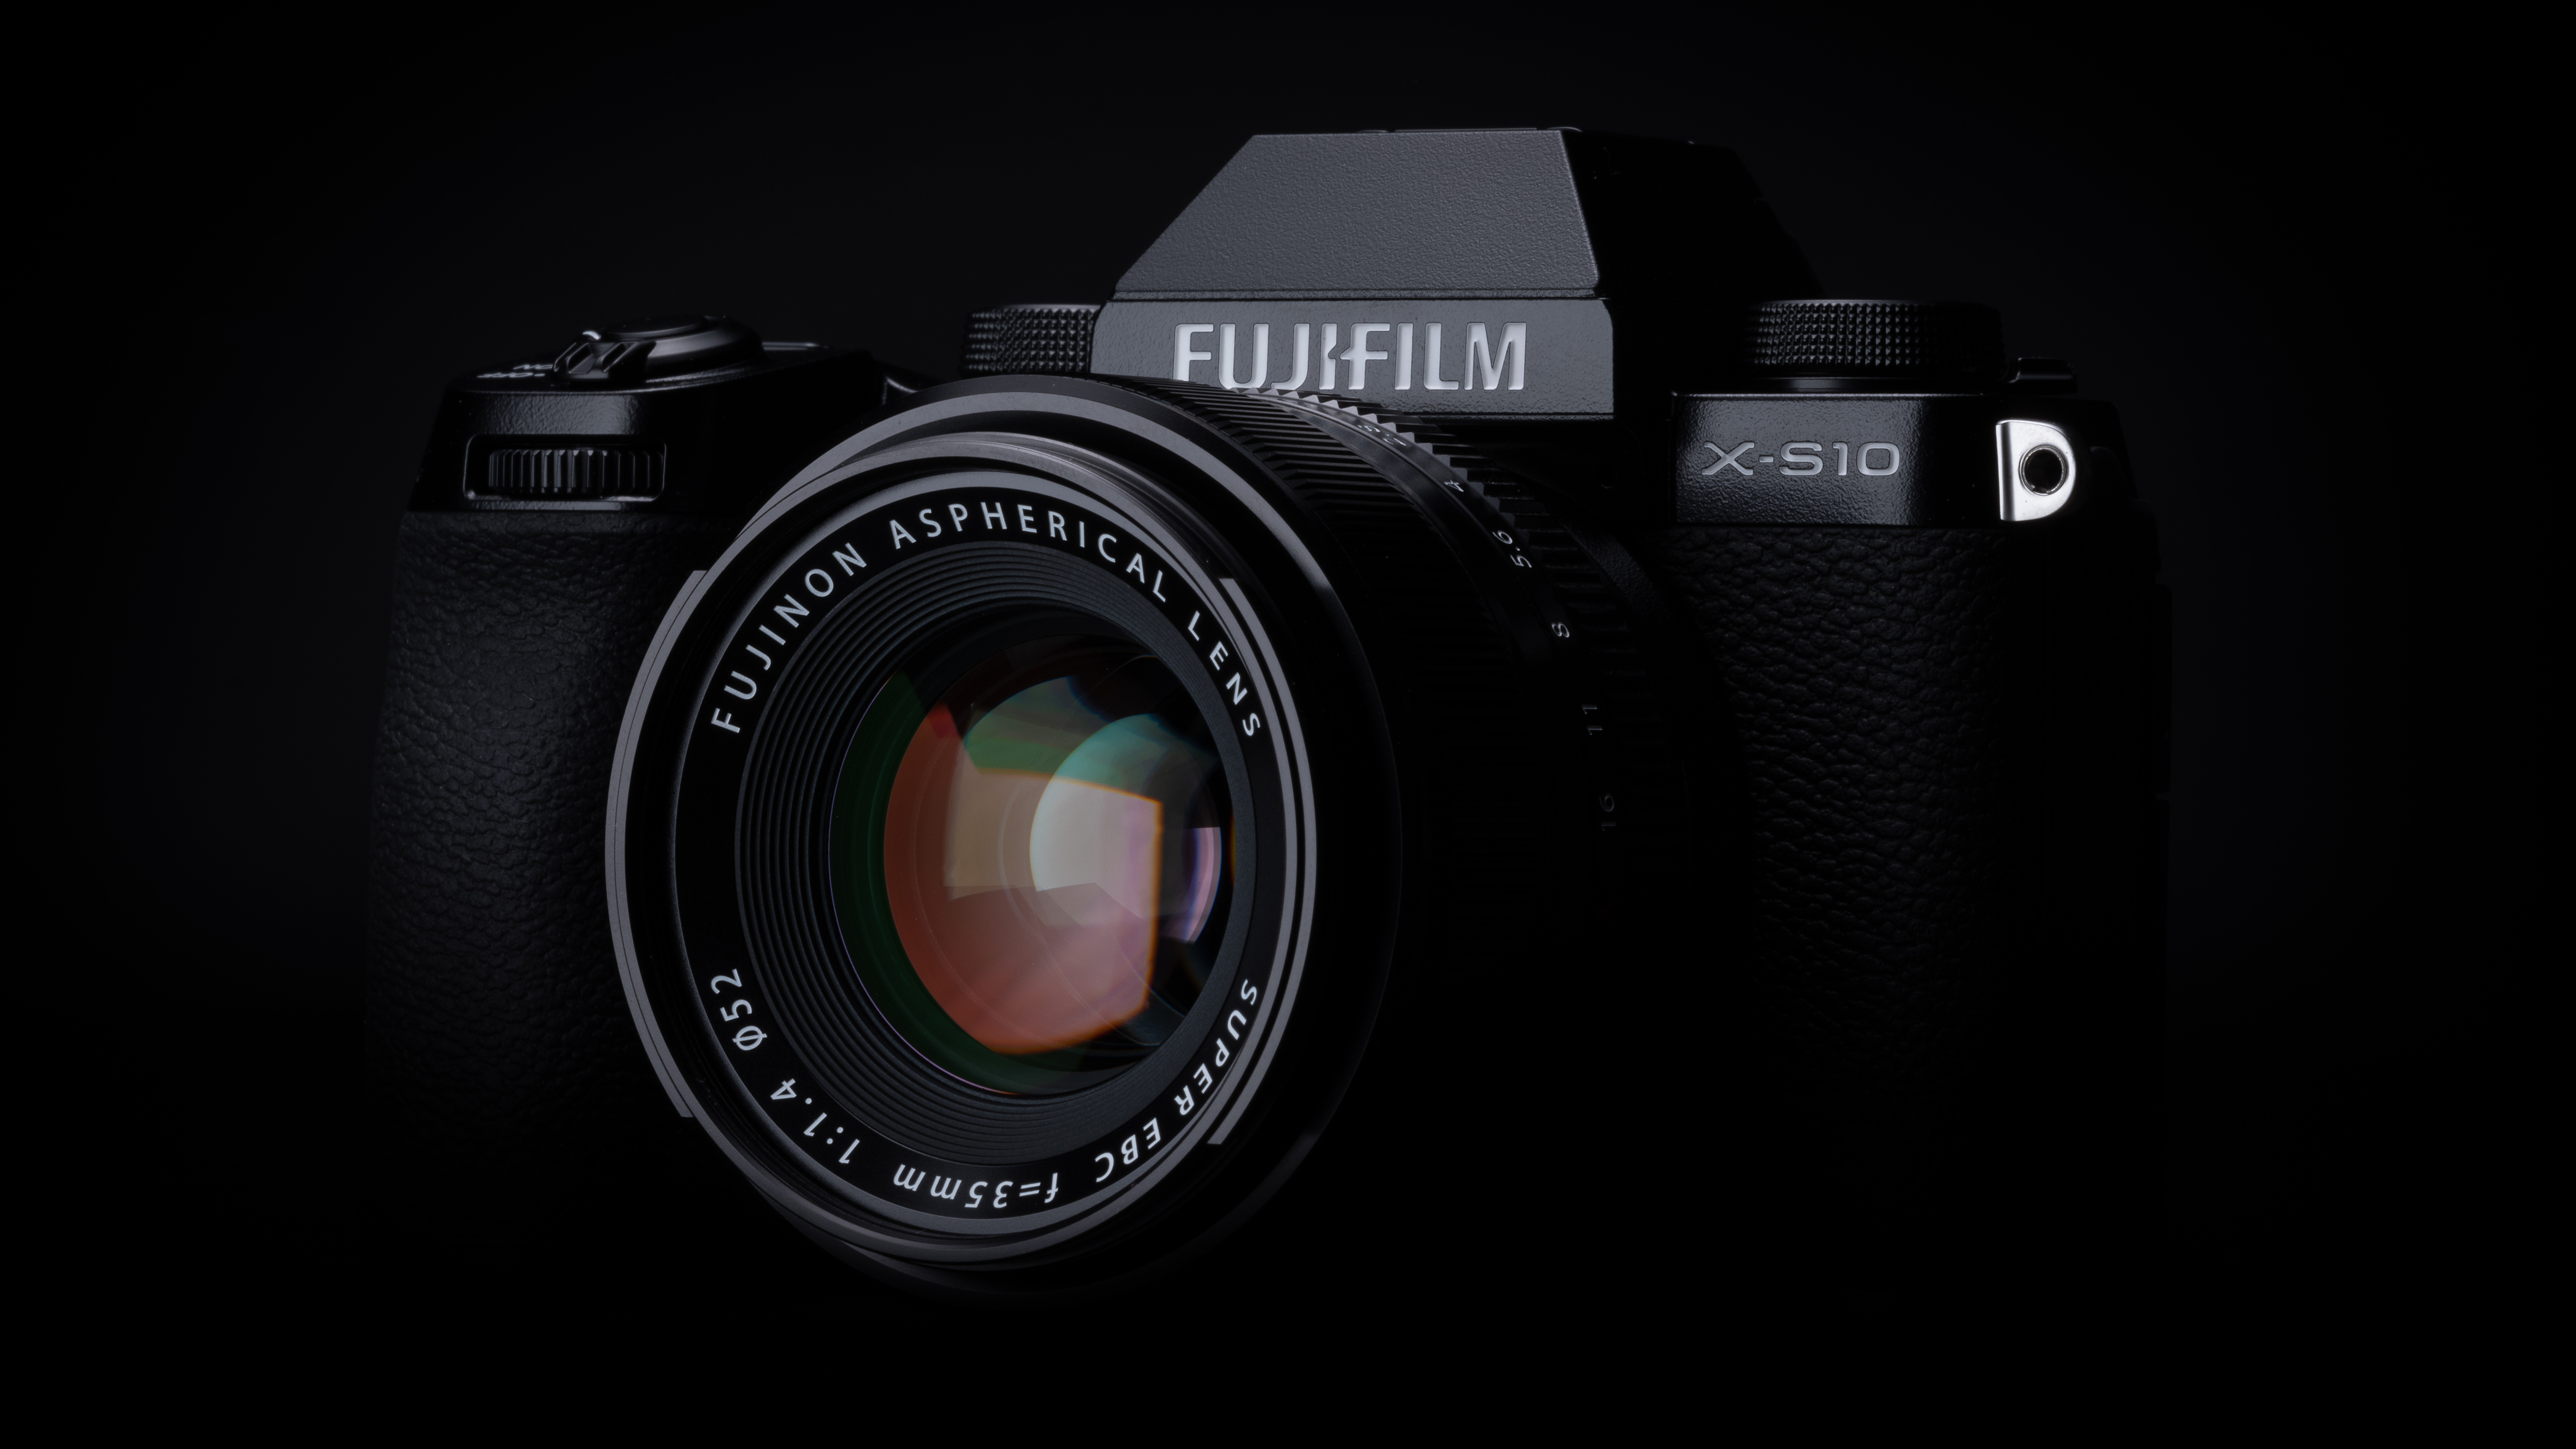 Fujifilm's X-S20 camera has a new processor and a $300 higher asking price  - The Verge